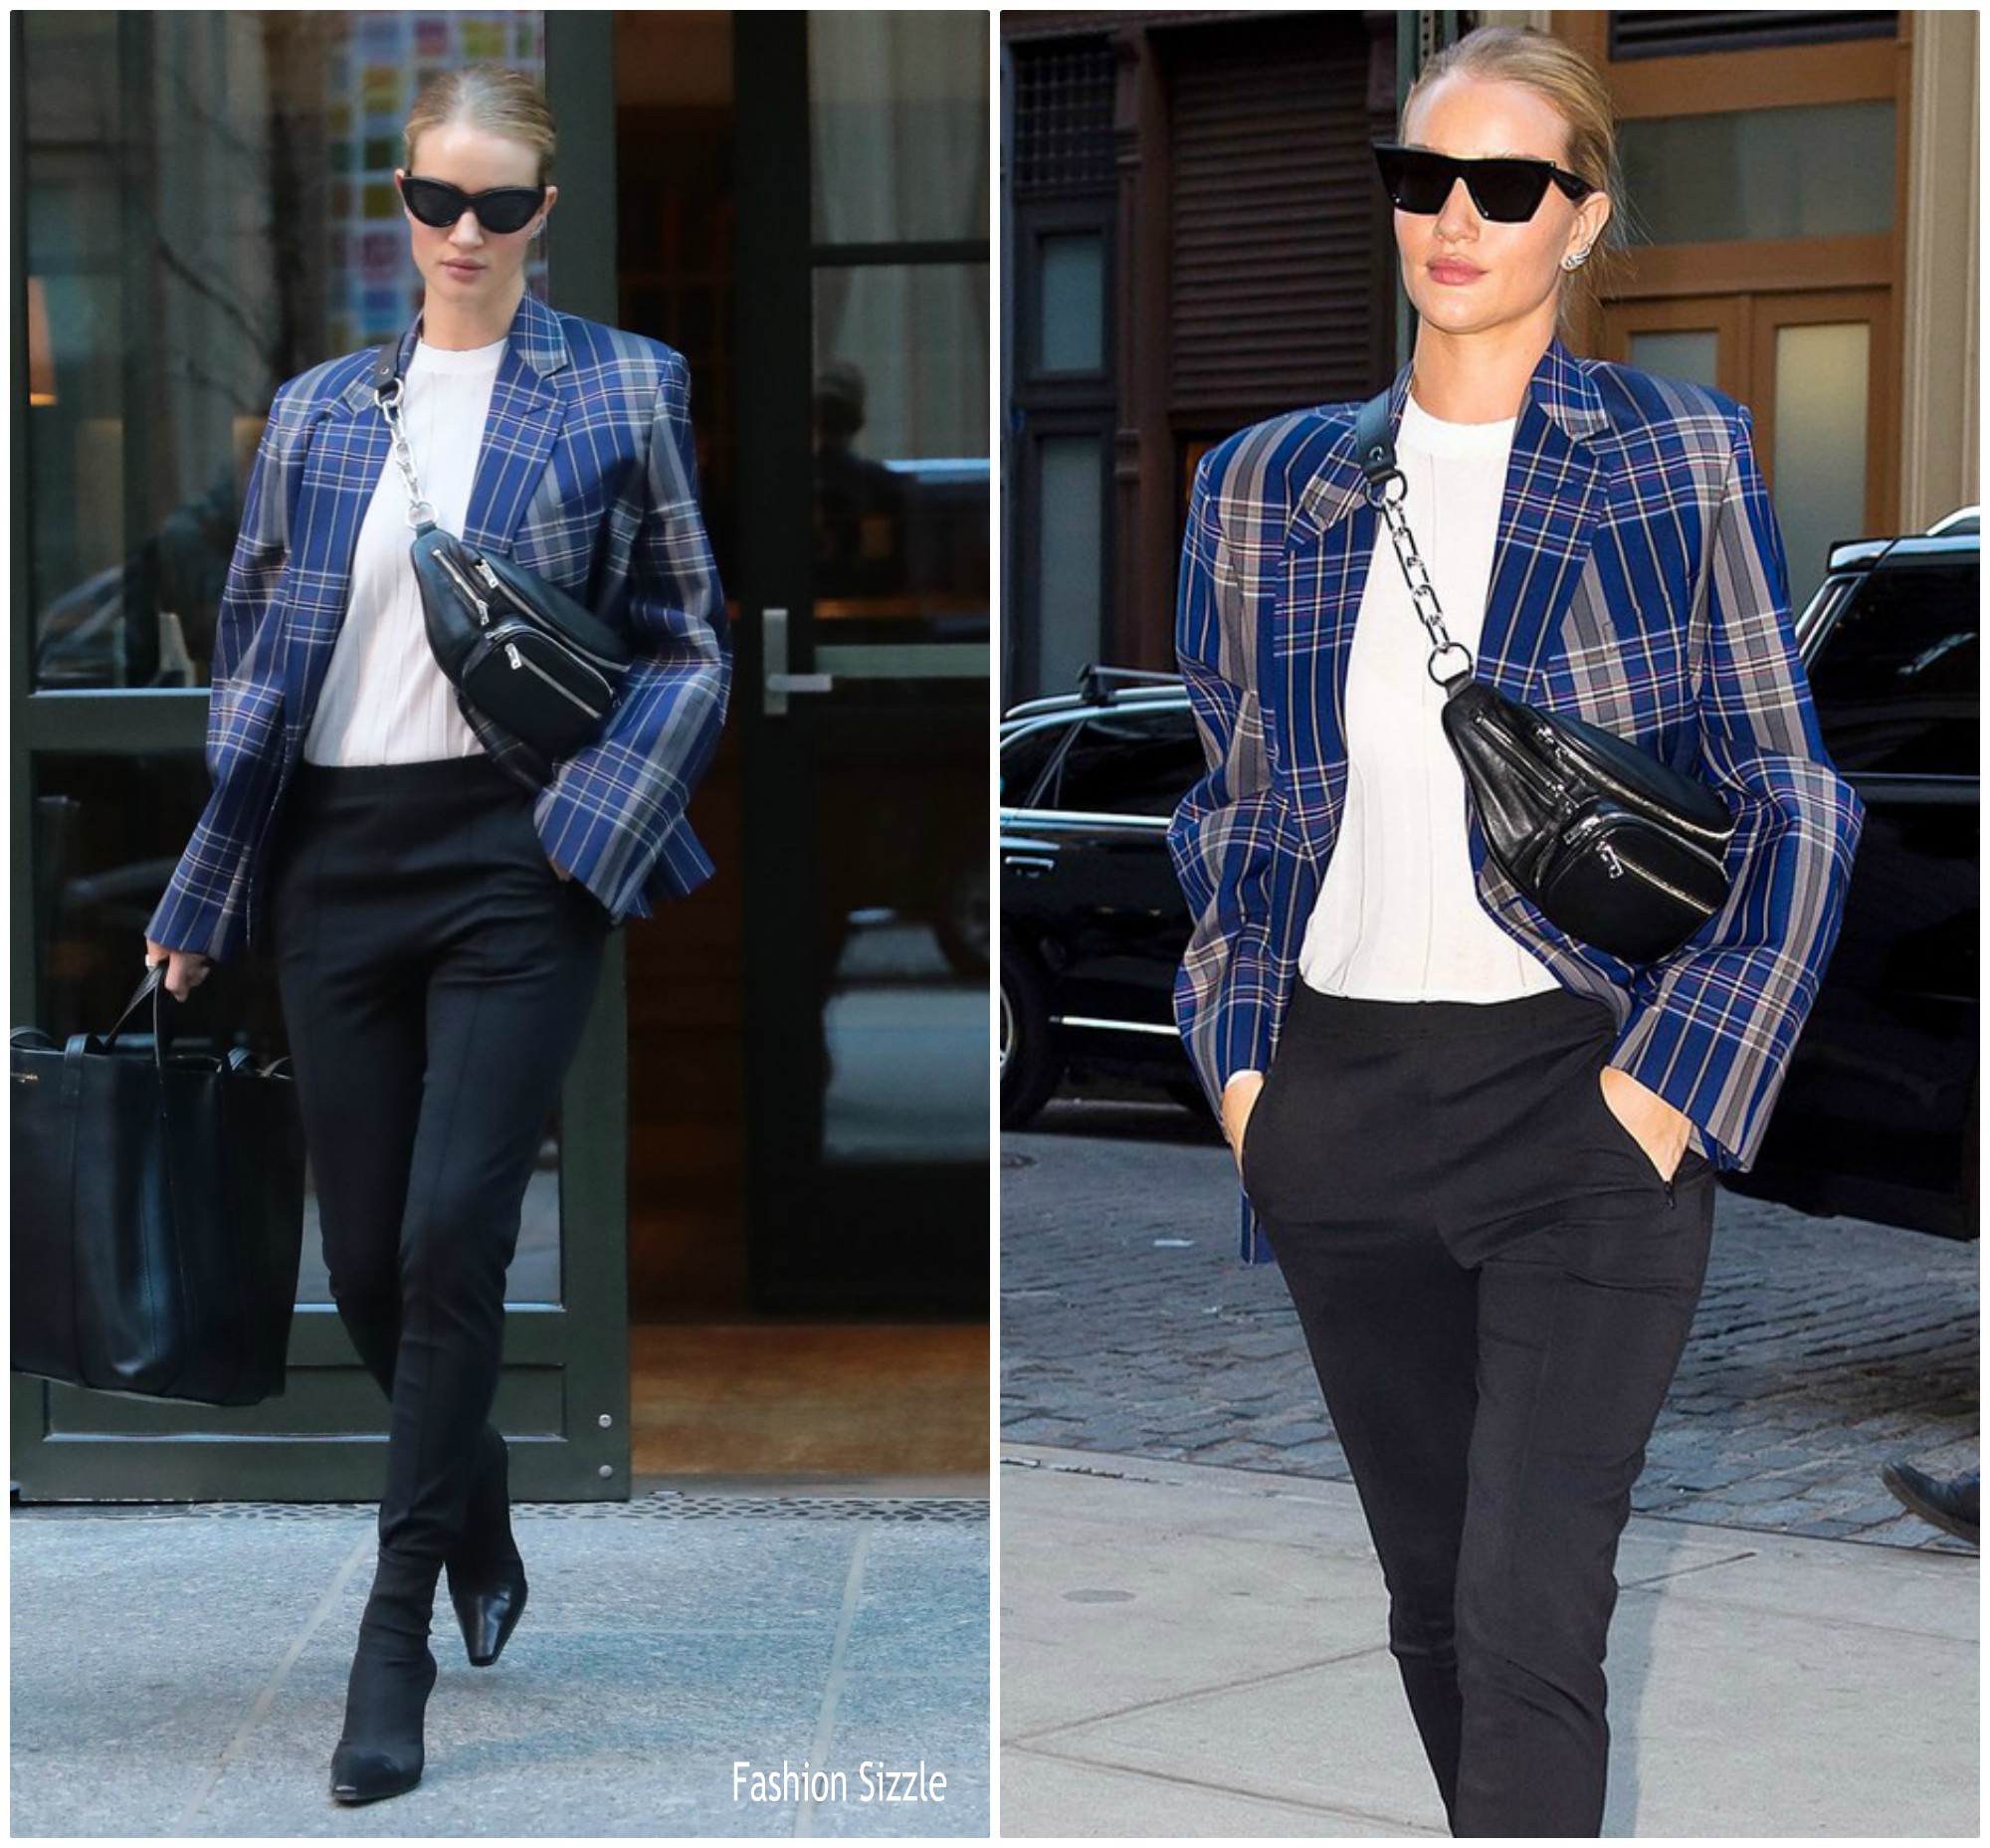  Rosie Huntington-Whiteley  In Acne Studios  -Out In New York